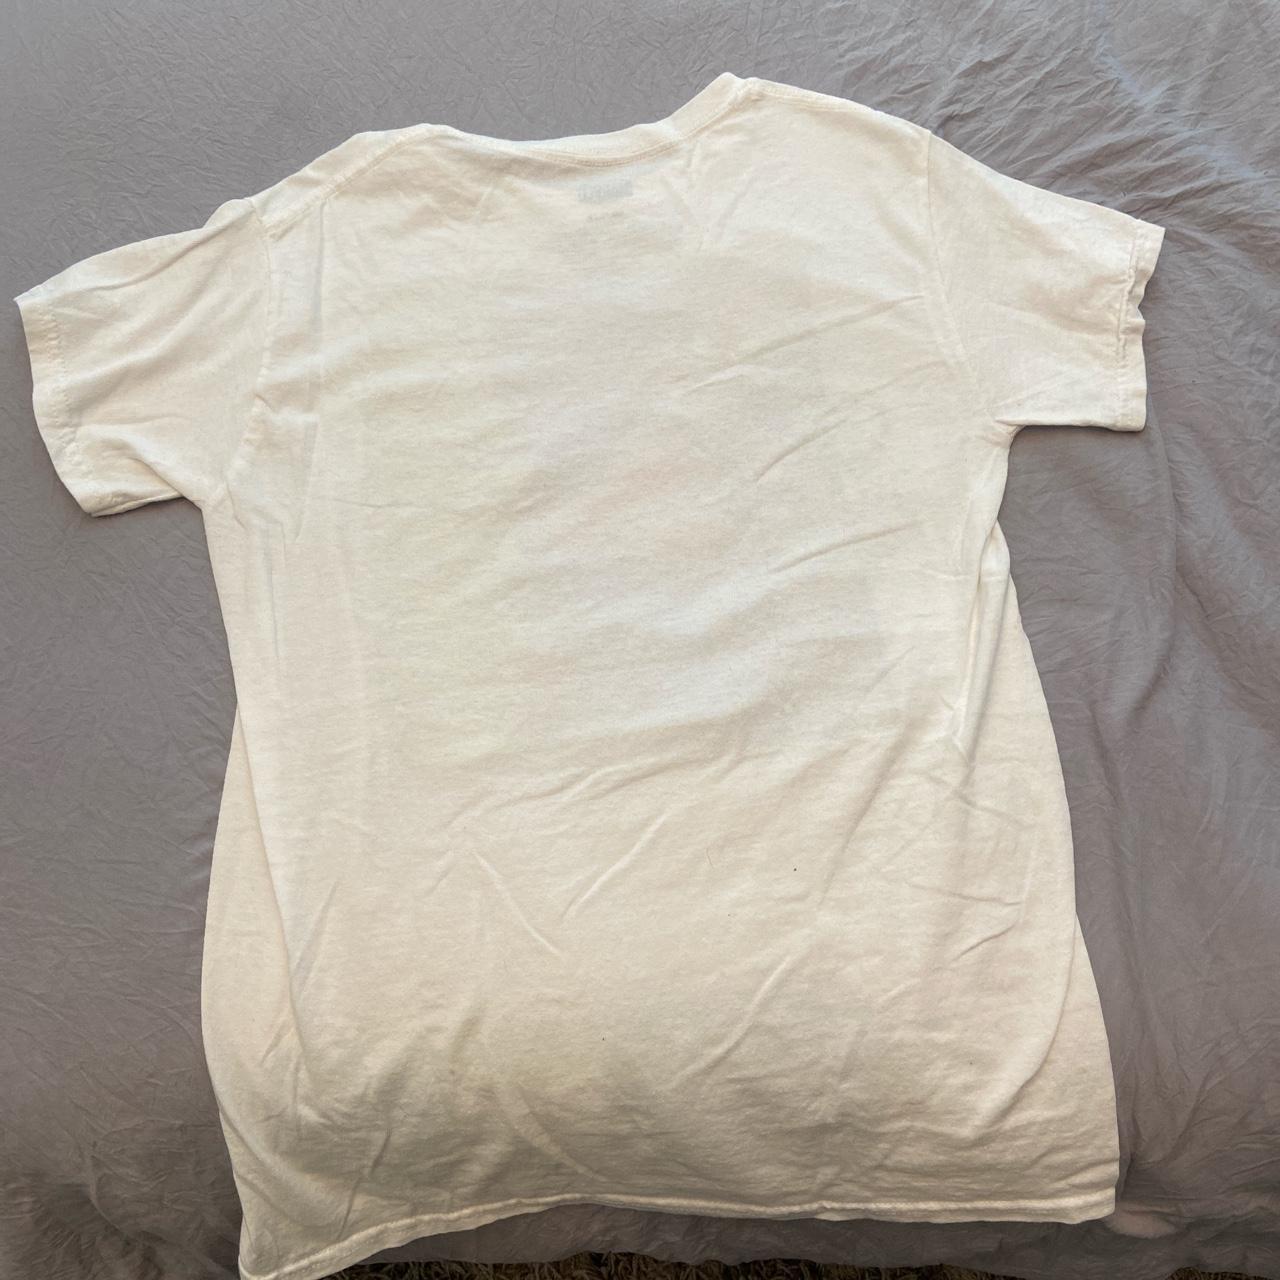 Target Men's White and Red T-shirt | Depop